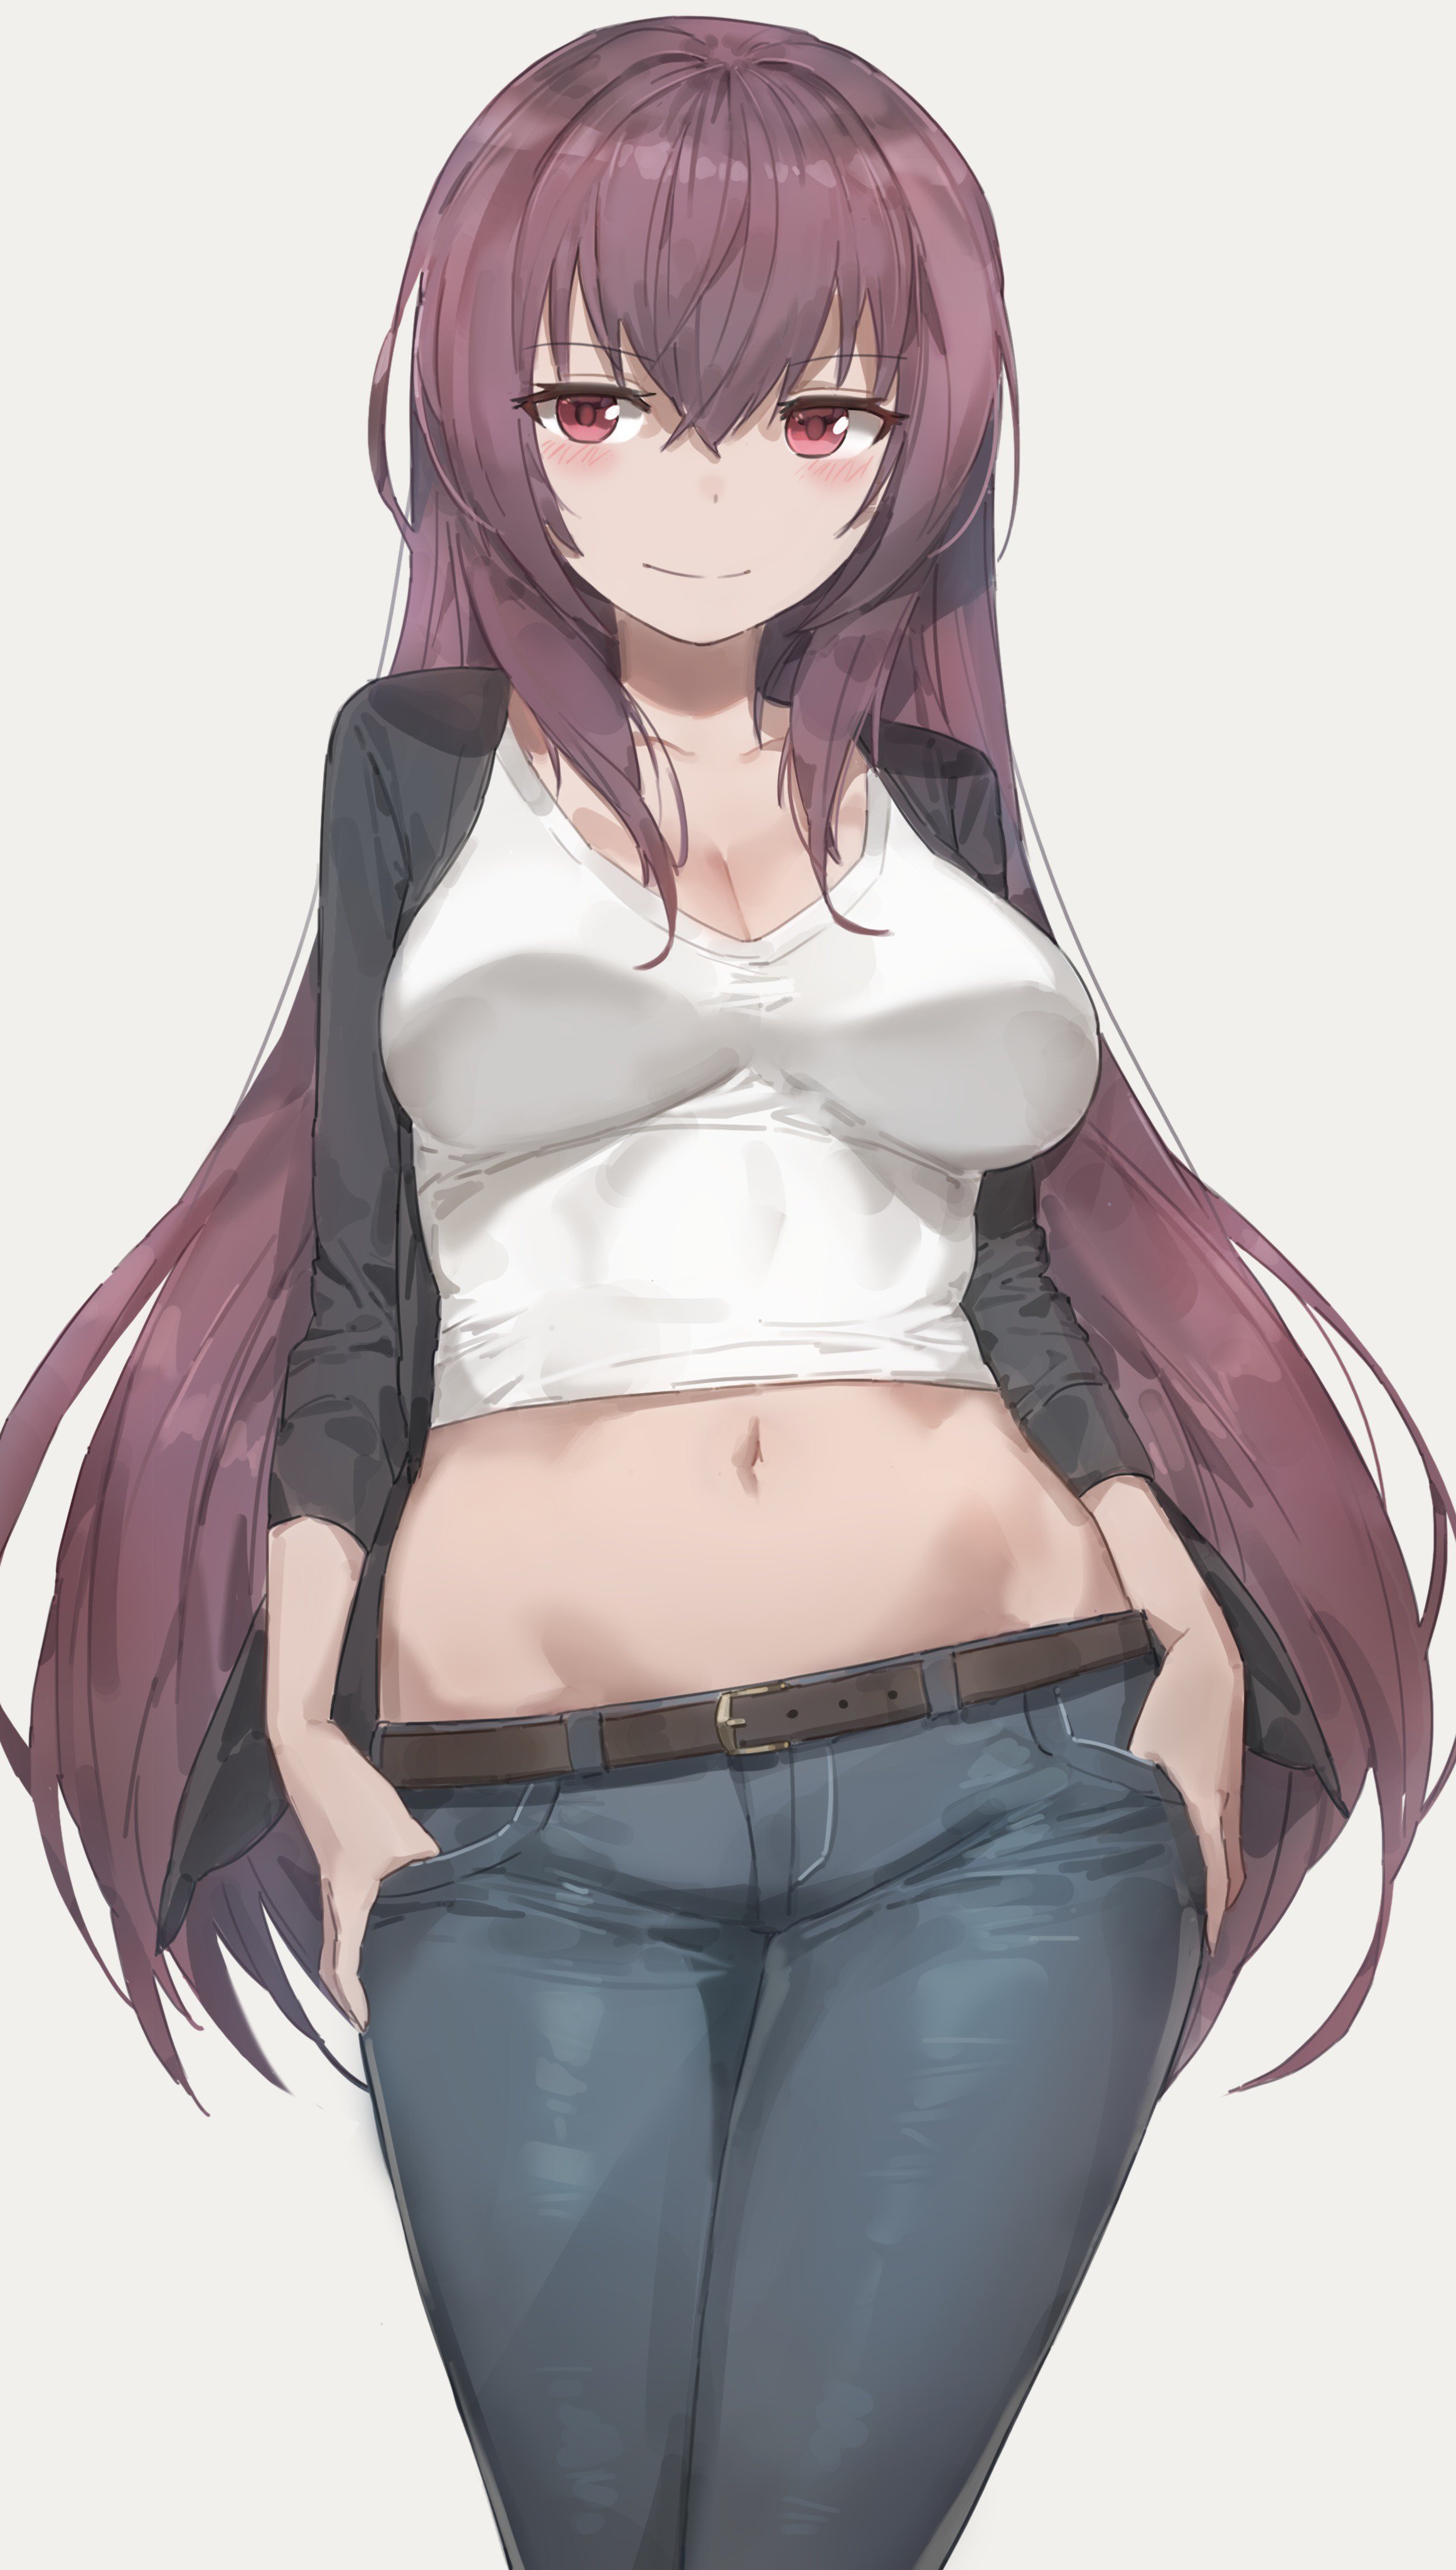 yande.re 390729 cleavage fate_grand_order open_shirt scathach_(fate_grand_order) yohan1754.jpg